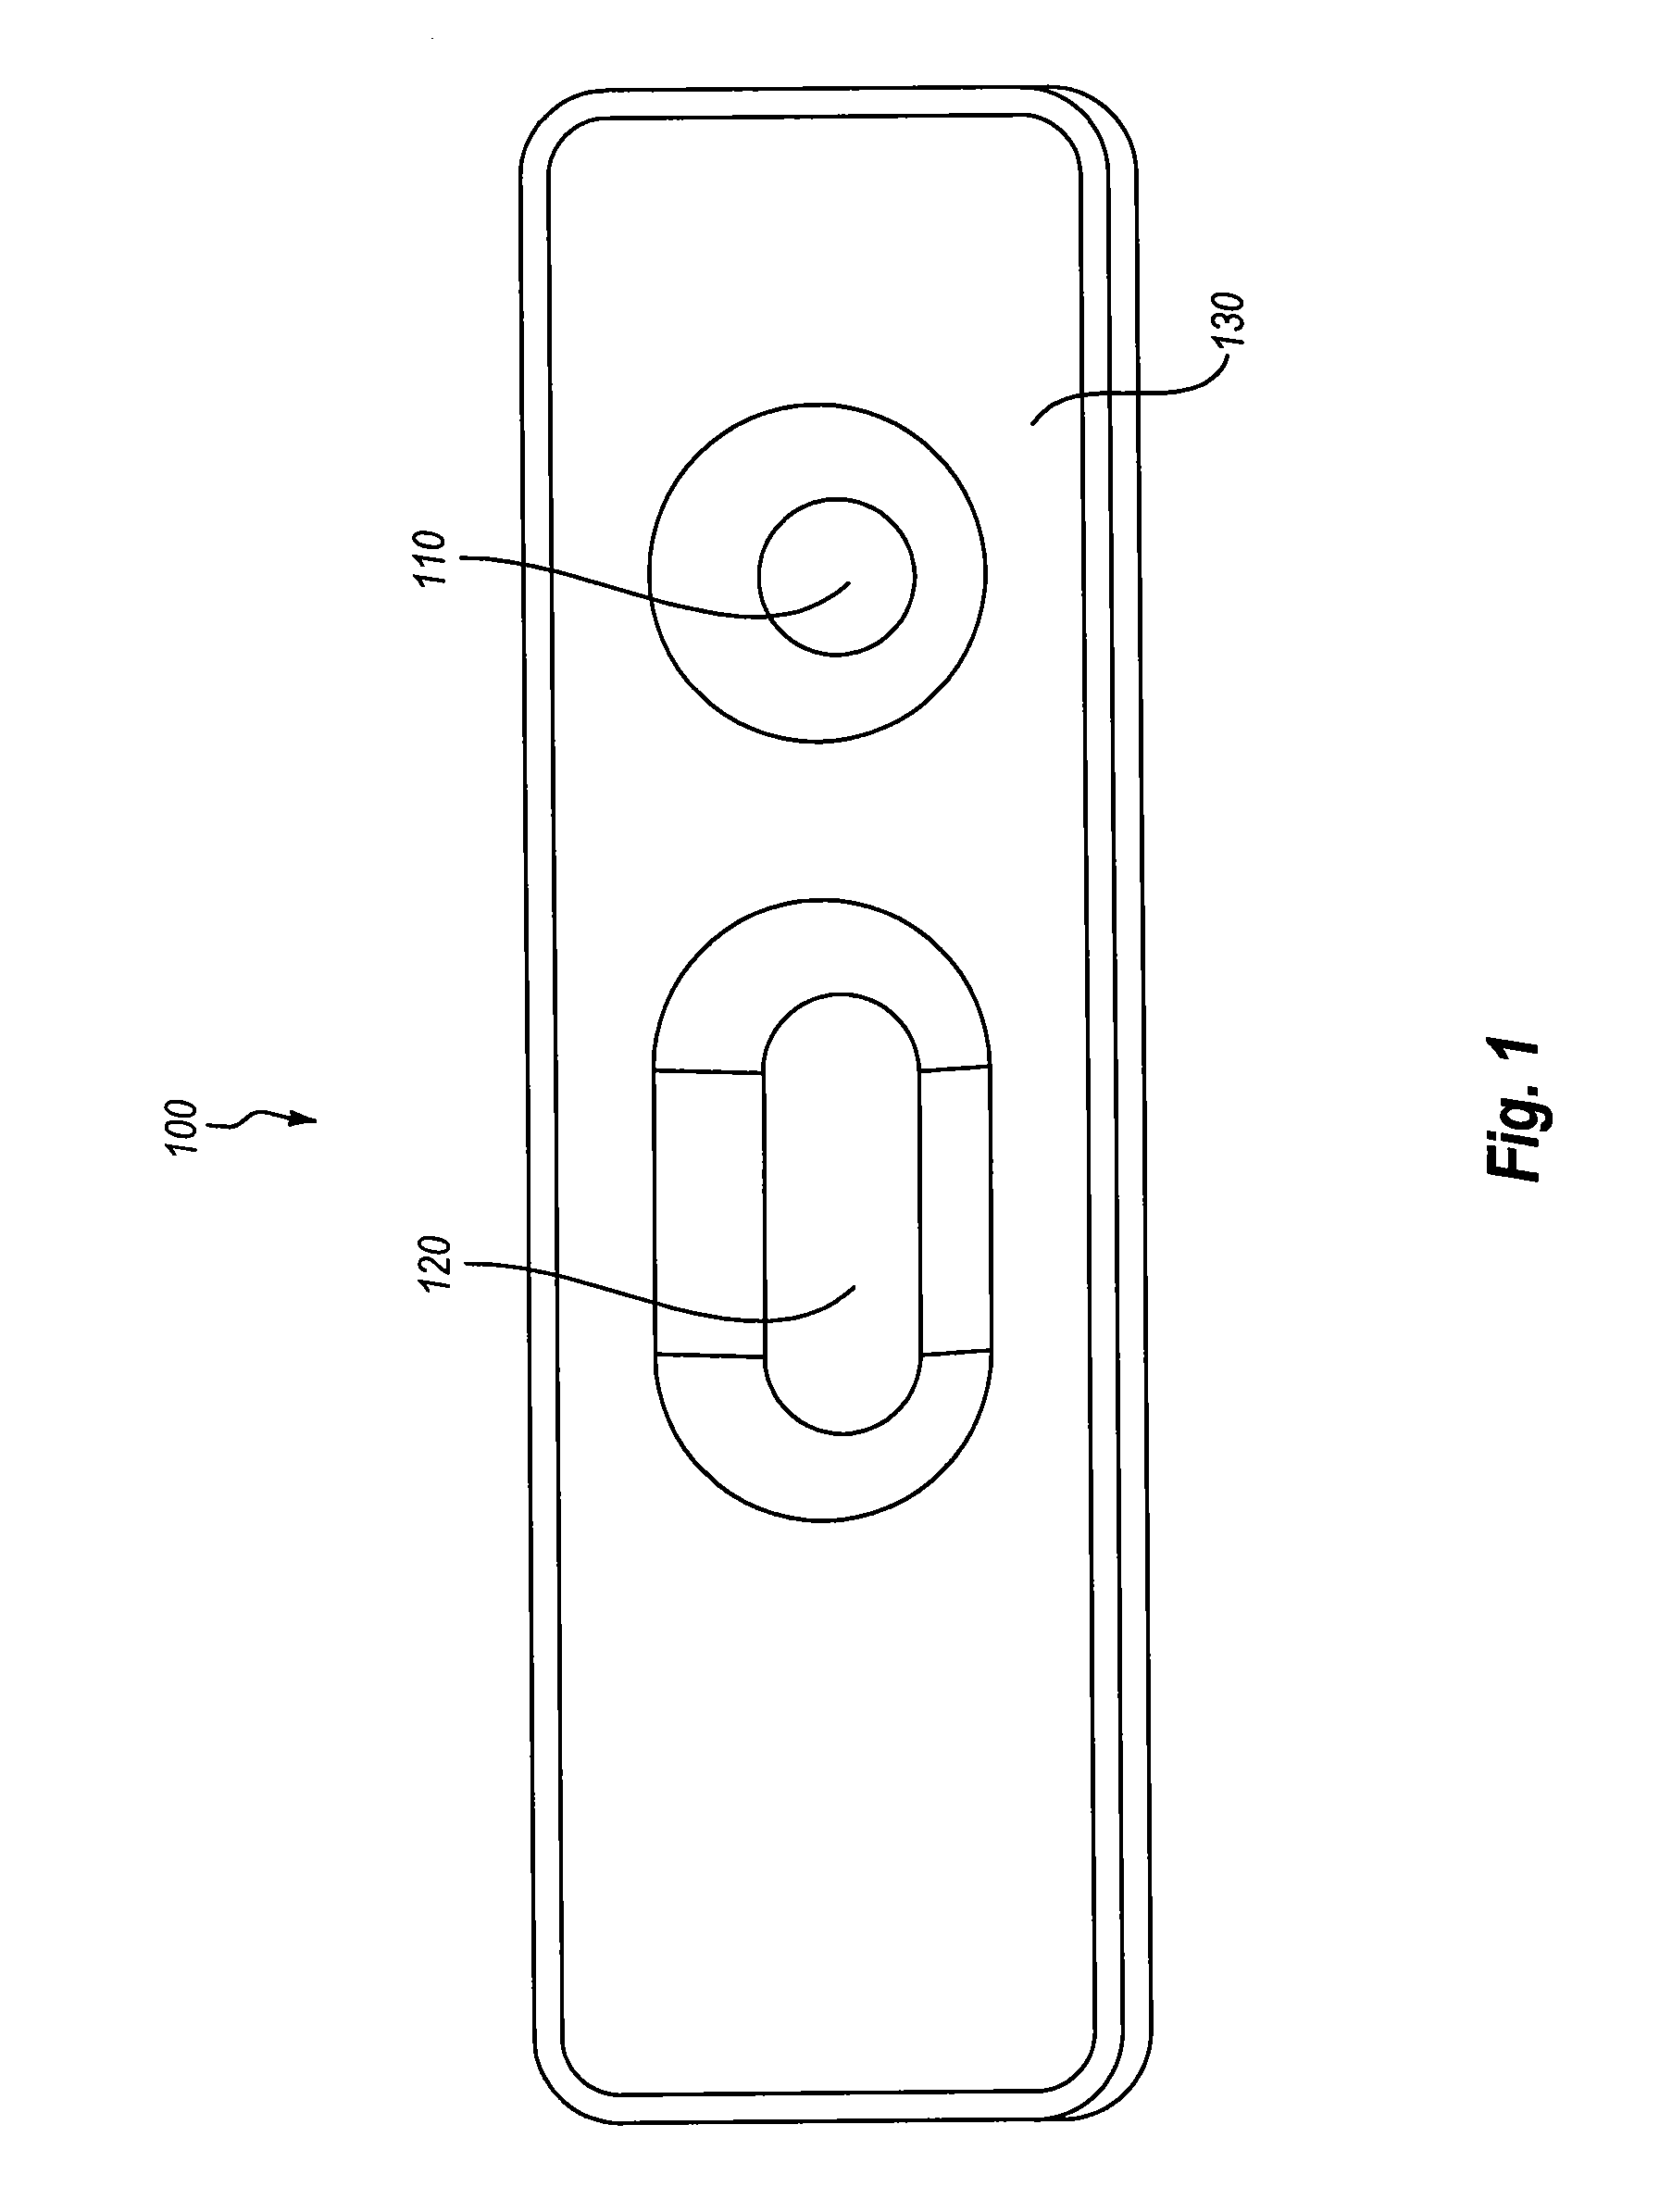 Device and method for performing a diagnostic test